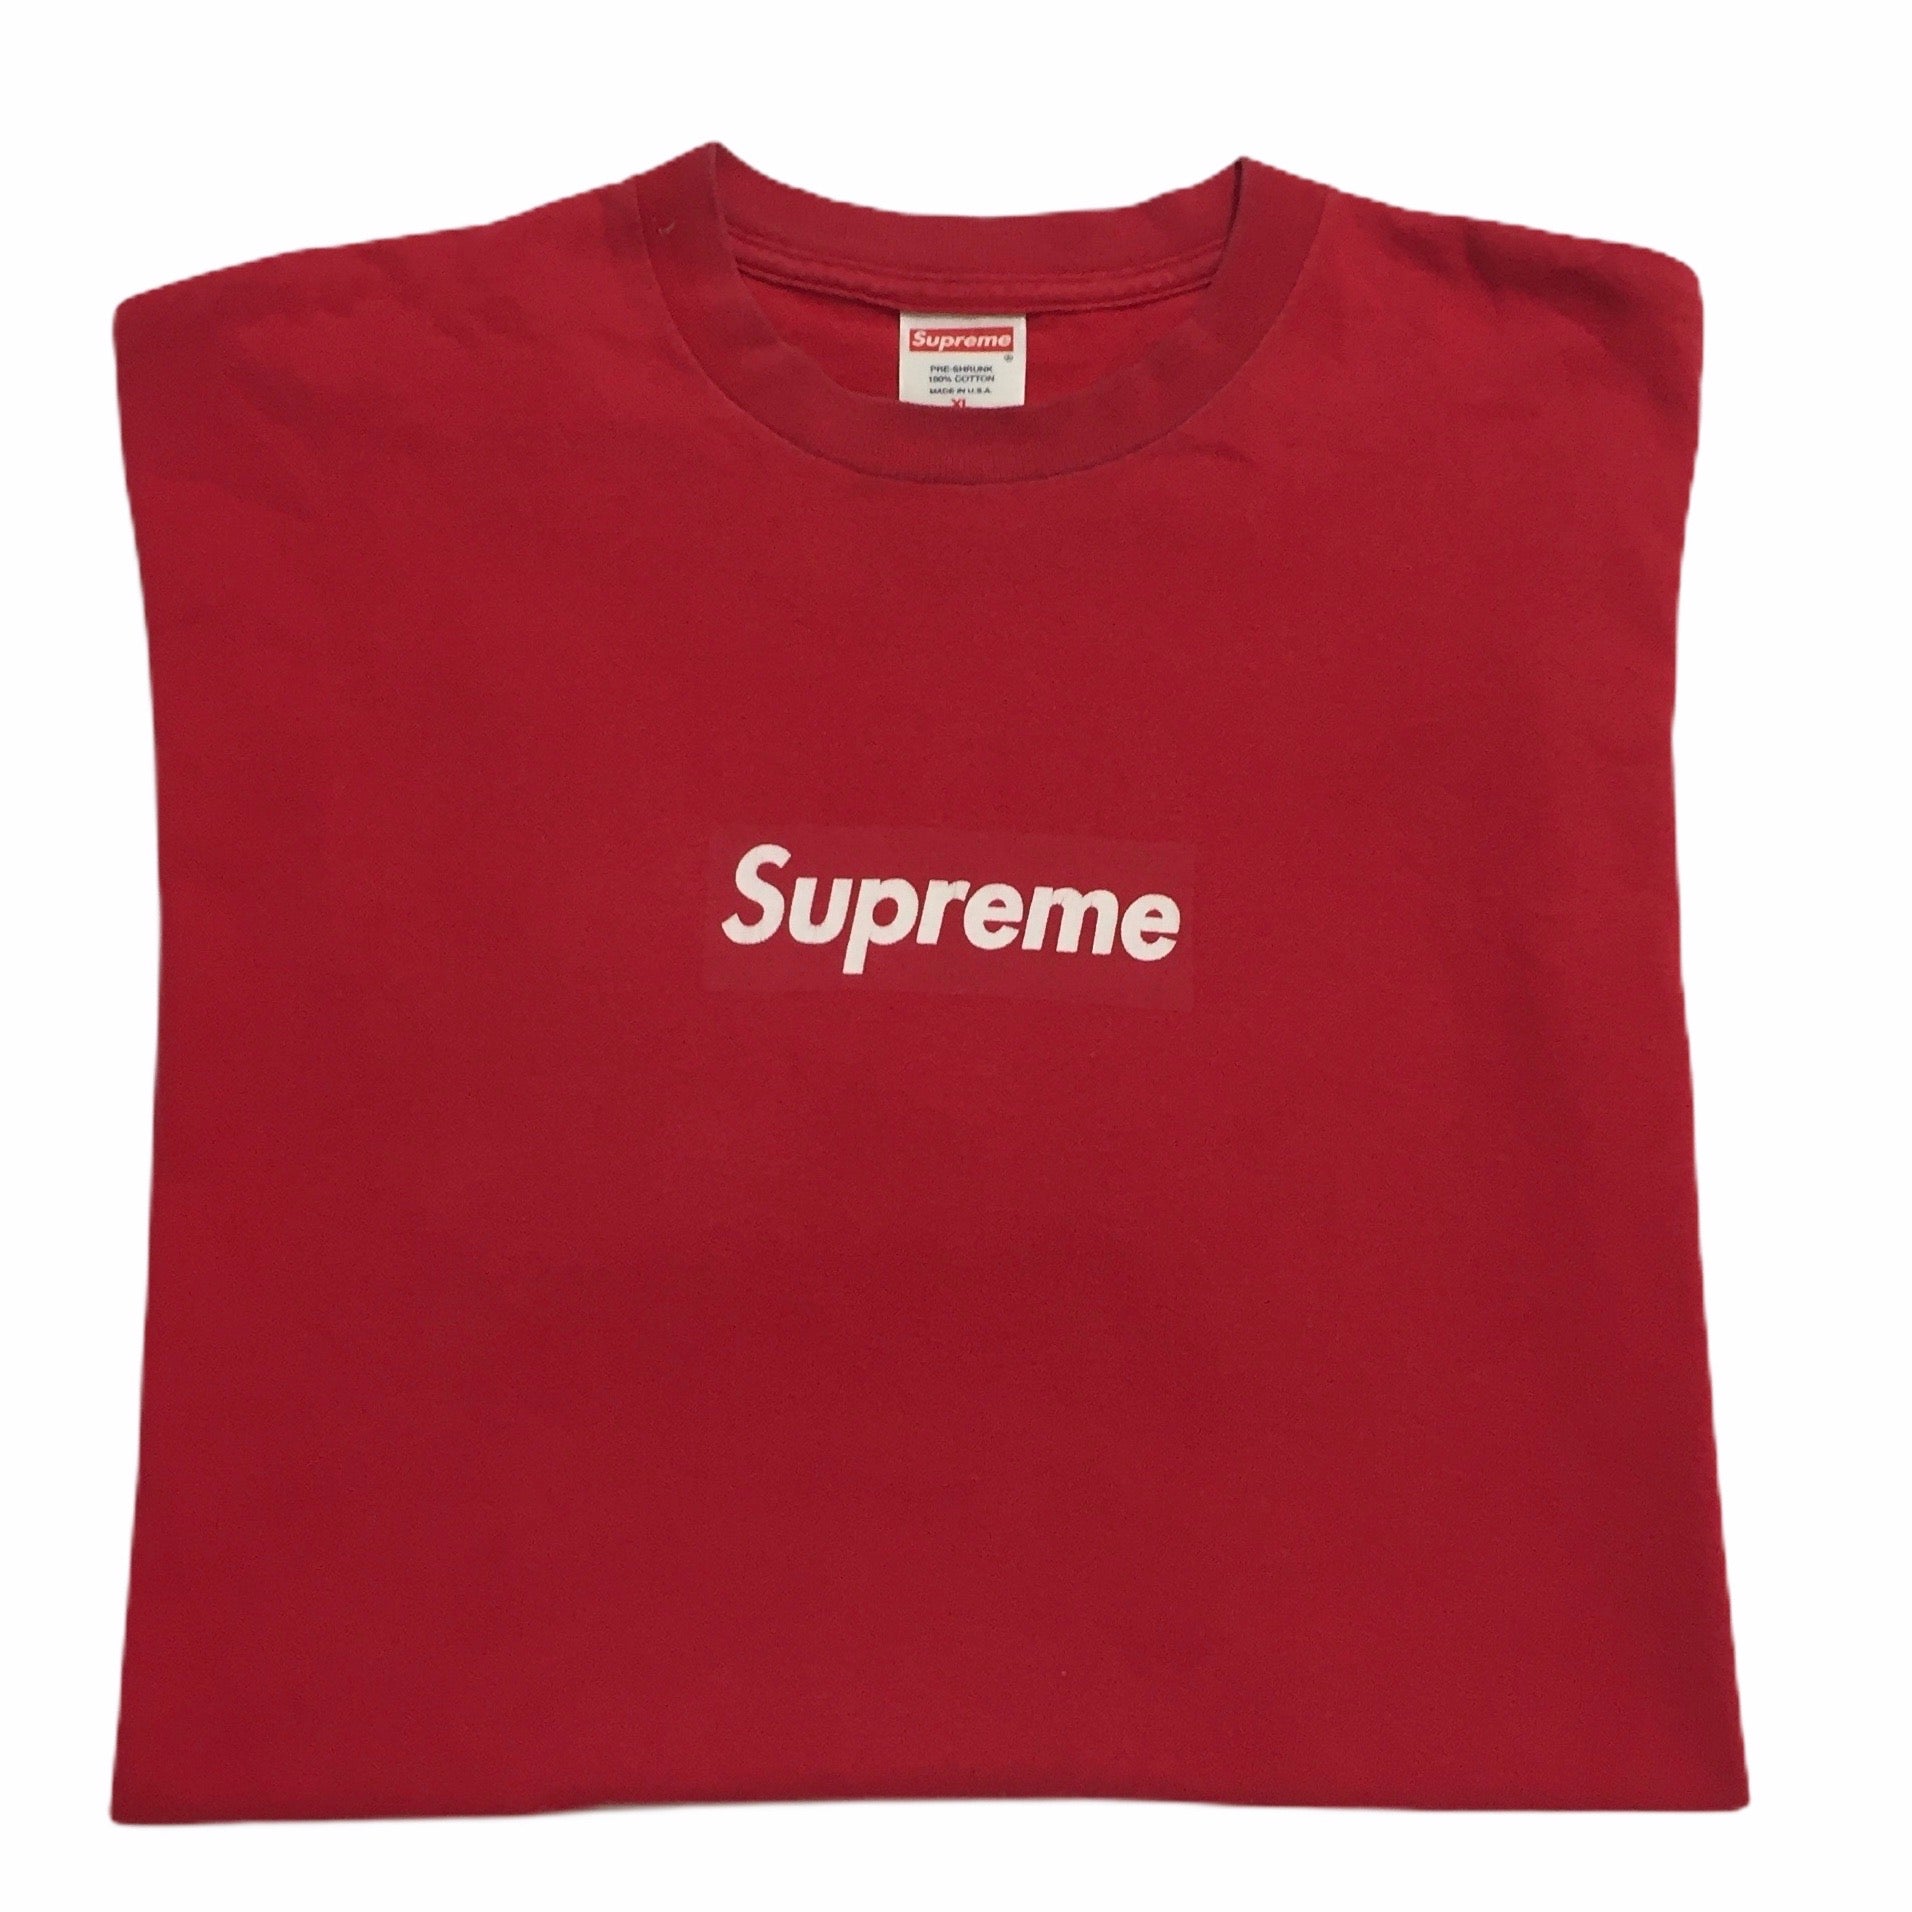 SUPREME TONAL BOX LOGO TEE WHITE UNBOXING AND FITTING ON BODY 